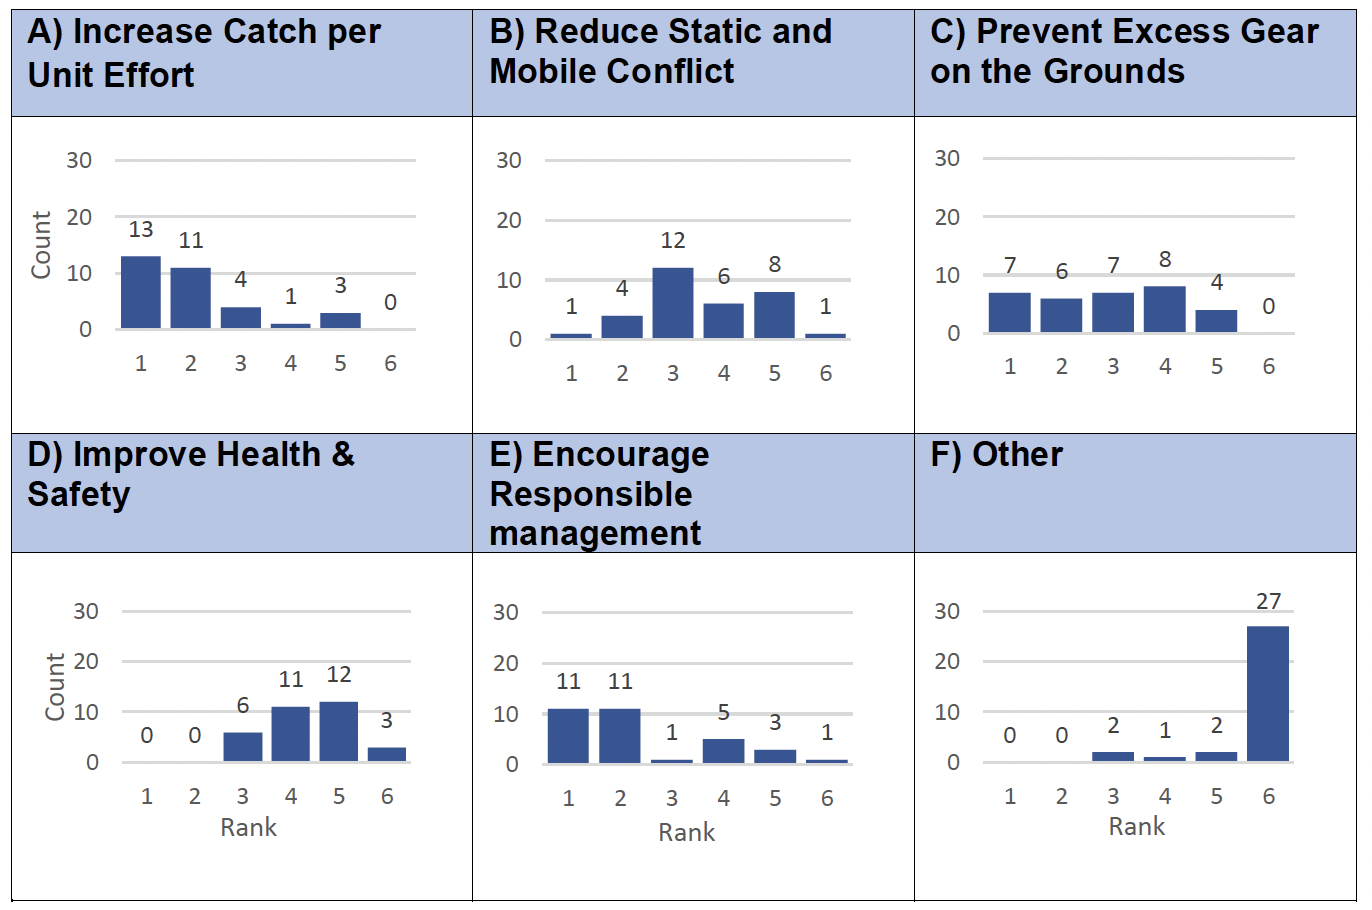 A series of 6 bar graphs showing the importance attributed by respondents to different aims of the pilot. These are ranked 1-6 from the most important to the least and averaged .
Graph A describes catch per unit effort with the majority of respondents placing a high degree of importance on this aim. Graph B describes reduction of static and mobile gear conflict with most respondents ranking this aim as between 3 and 5. Graph C describes the prevention of excess gear on the ground and shows that most respondents ranked this aim between 1 and 4. Only 4 respondents ranked this aim between 5 and 6. Graph D describes health and safety with respondents, in general attributing lower importance to this aim. Graph E describes encouragement of responsible management with the majority of respondents placing high or very high importance on this aim. Graph F describes other (non specified) aims of the pilot and the vast majority of respondents regarded this as being of the lowest importance.